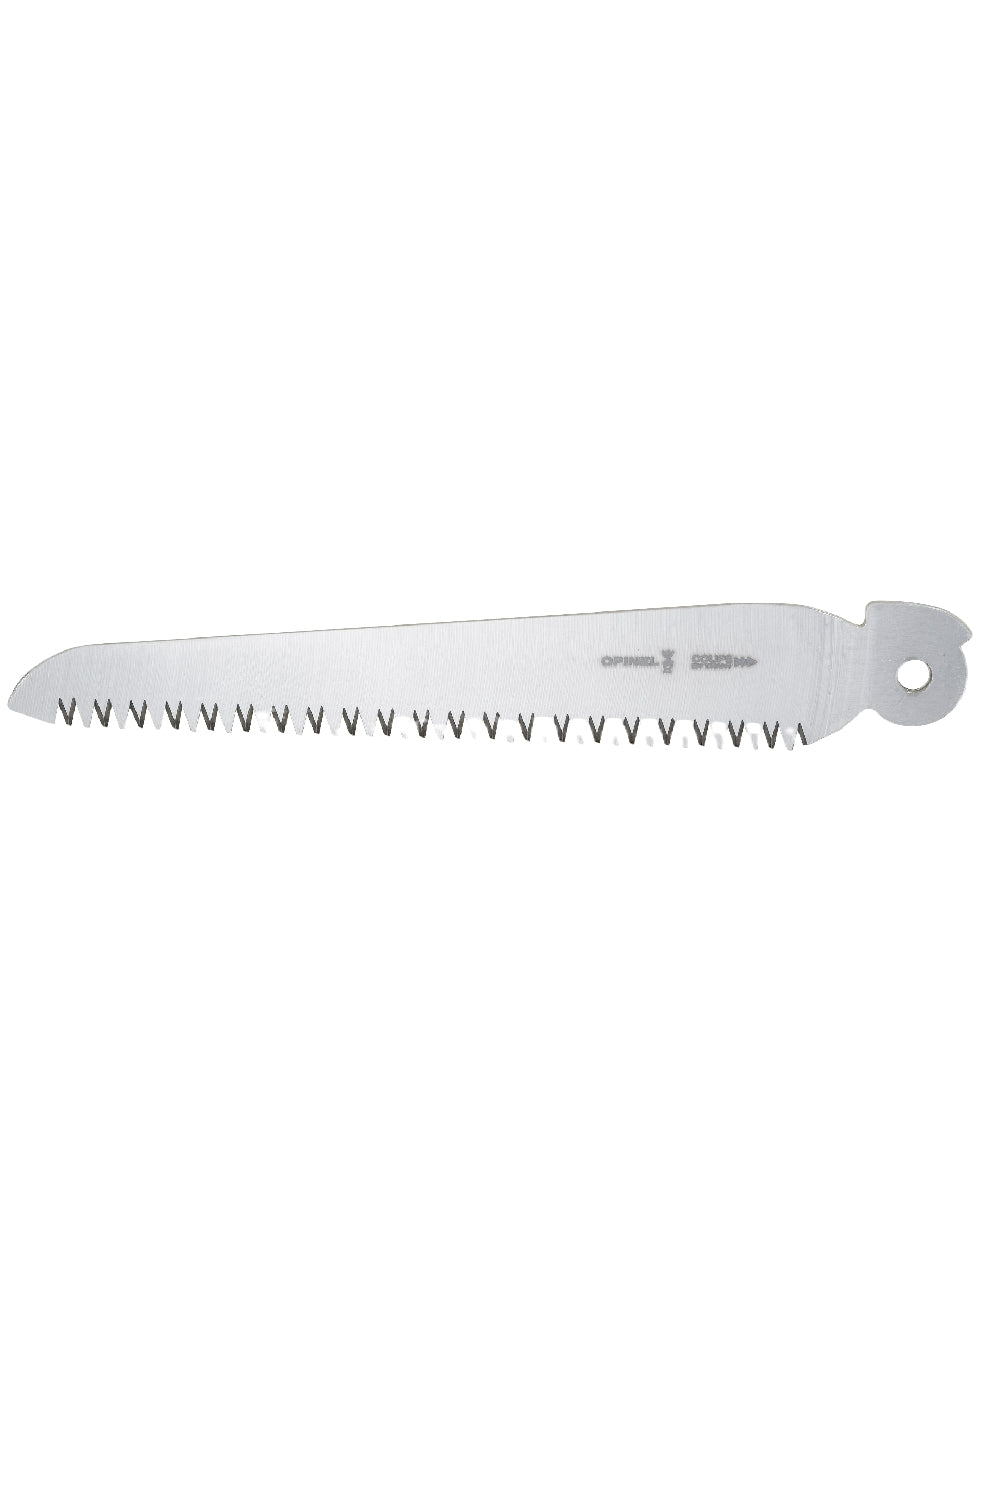 Opinel No.18 Folding Saw Boxed